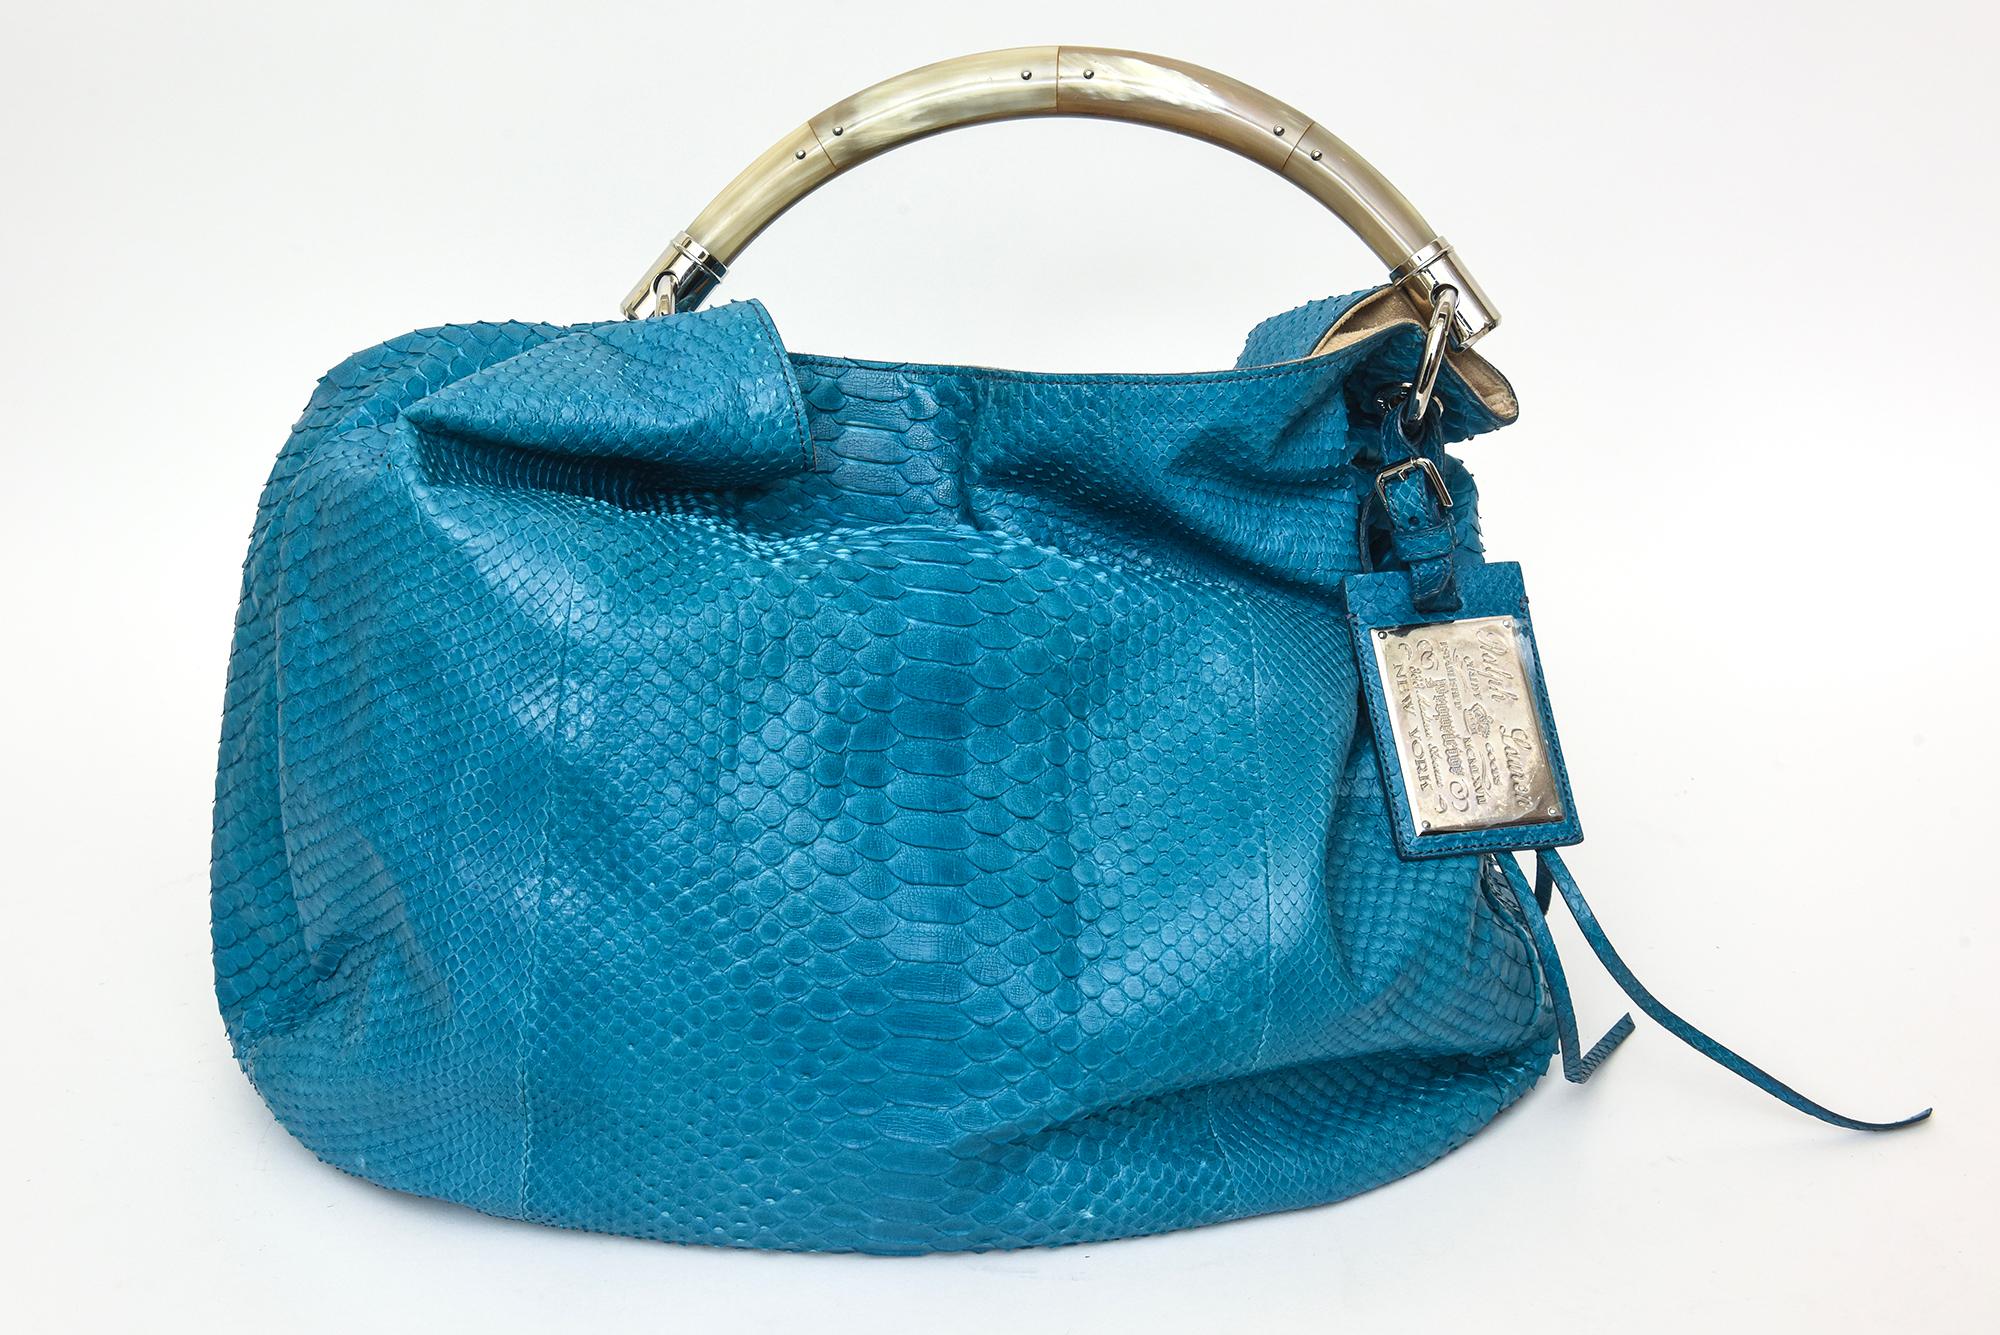 This ultra gorgeous and chic Ralph Lauren turquoise python arm and shoulder bag has a top handle made out of bone like material. The handle is embellished with small silver studs and silver hardware. There is a silver attached plague or tag of Ralph